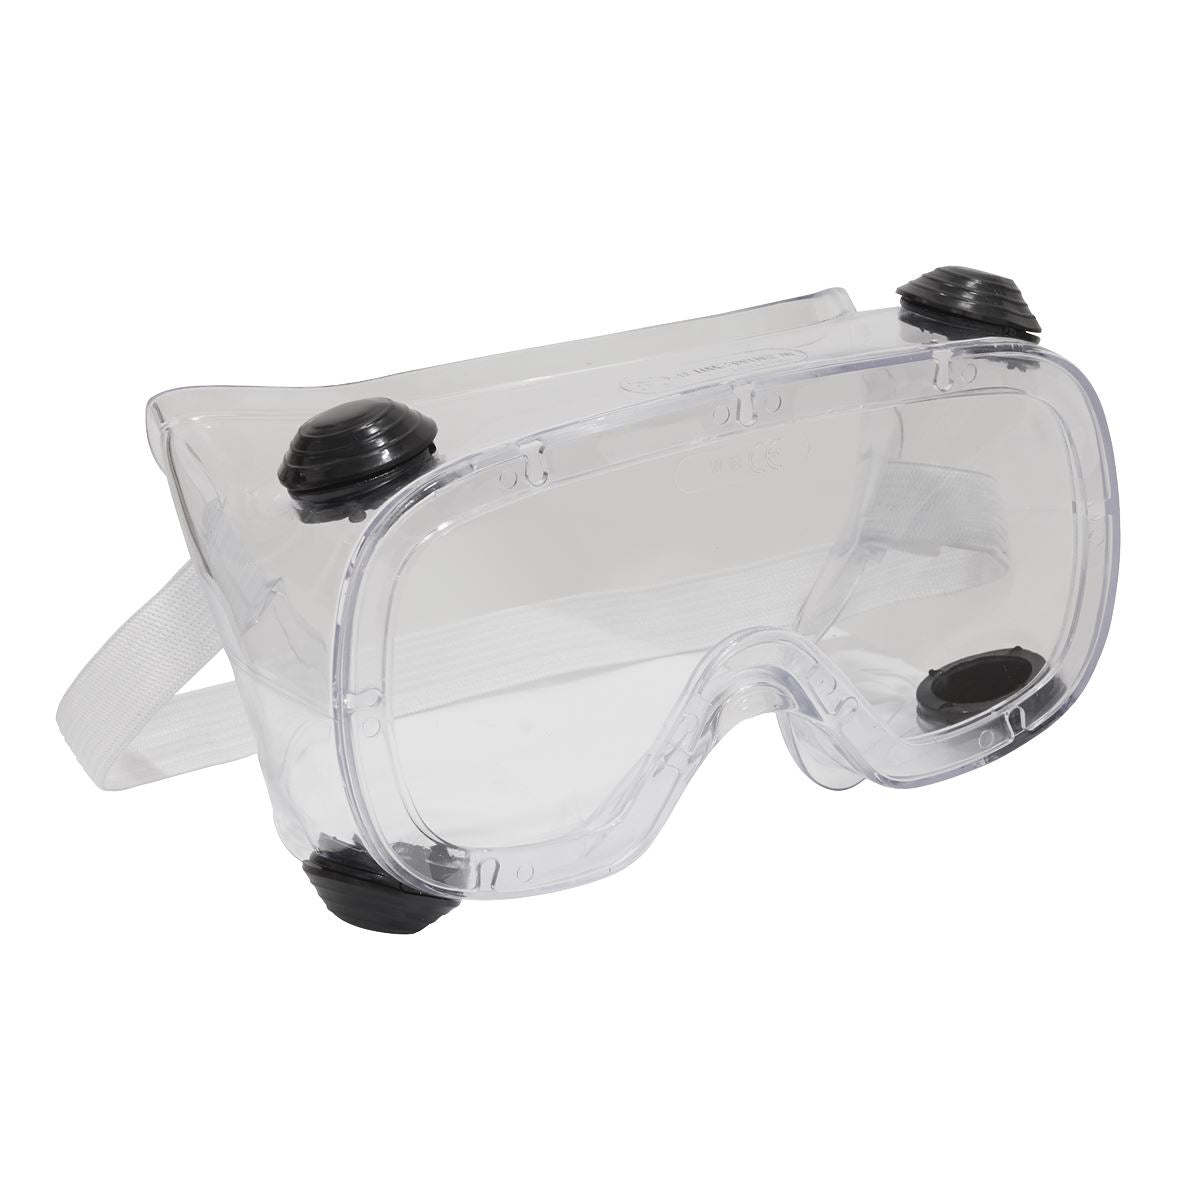 Worksafe by Sealey Standard Goggles Indirect Vent Impact Resistant